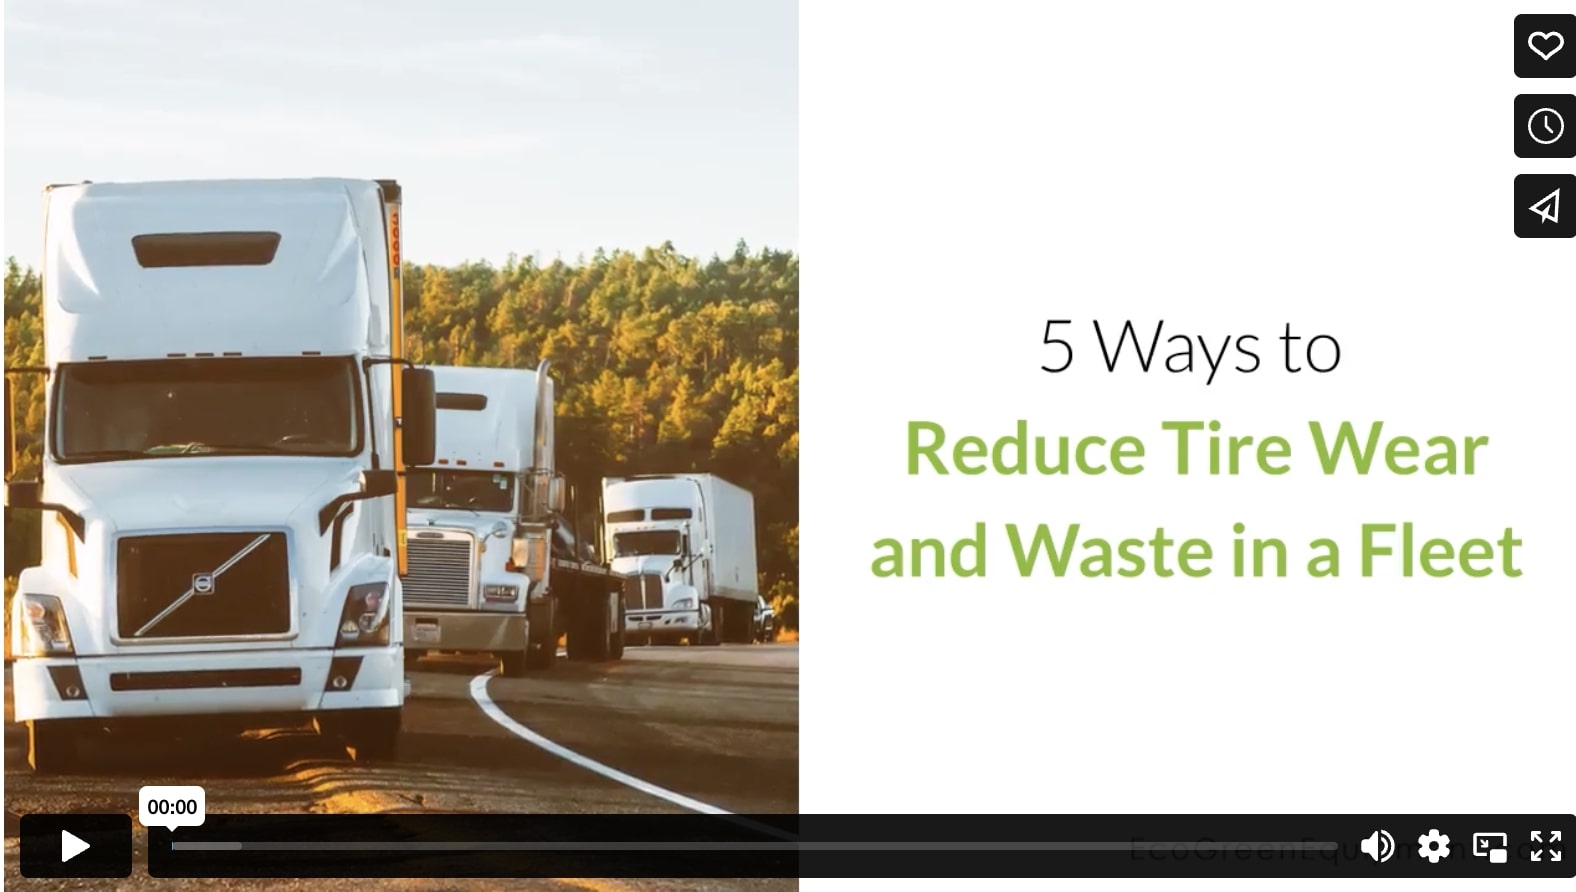 5 Ways to Reduce Tire Wear and Waste in a Fleet